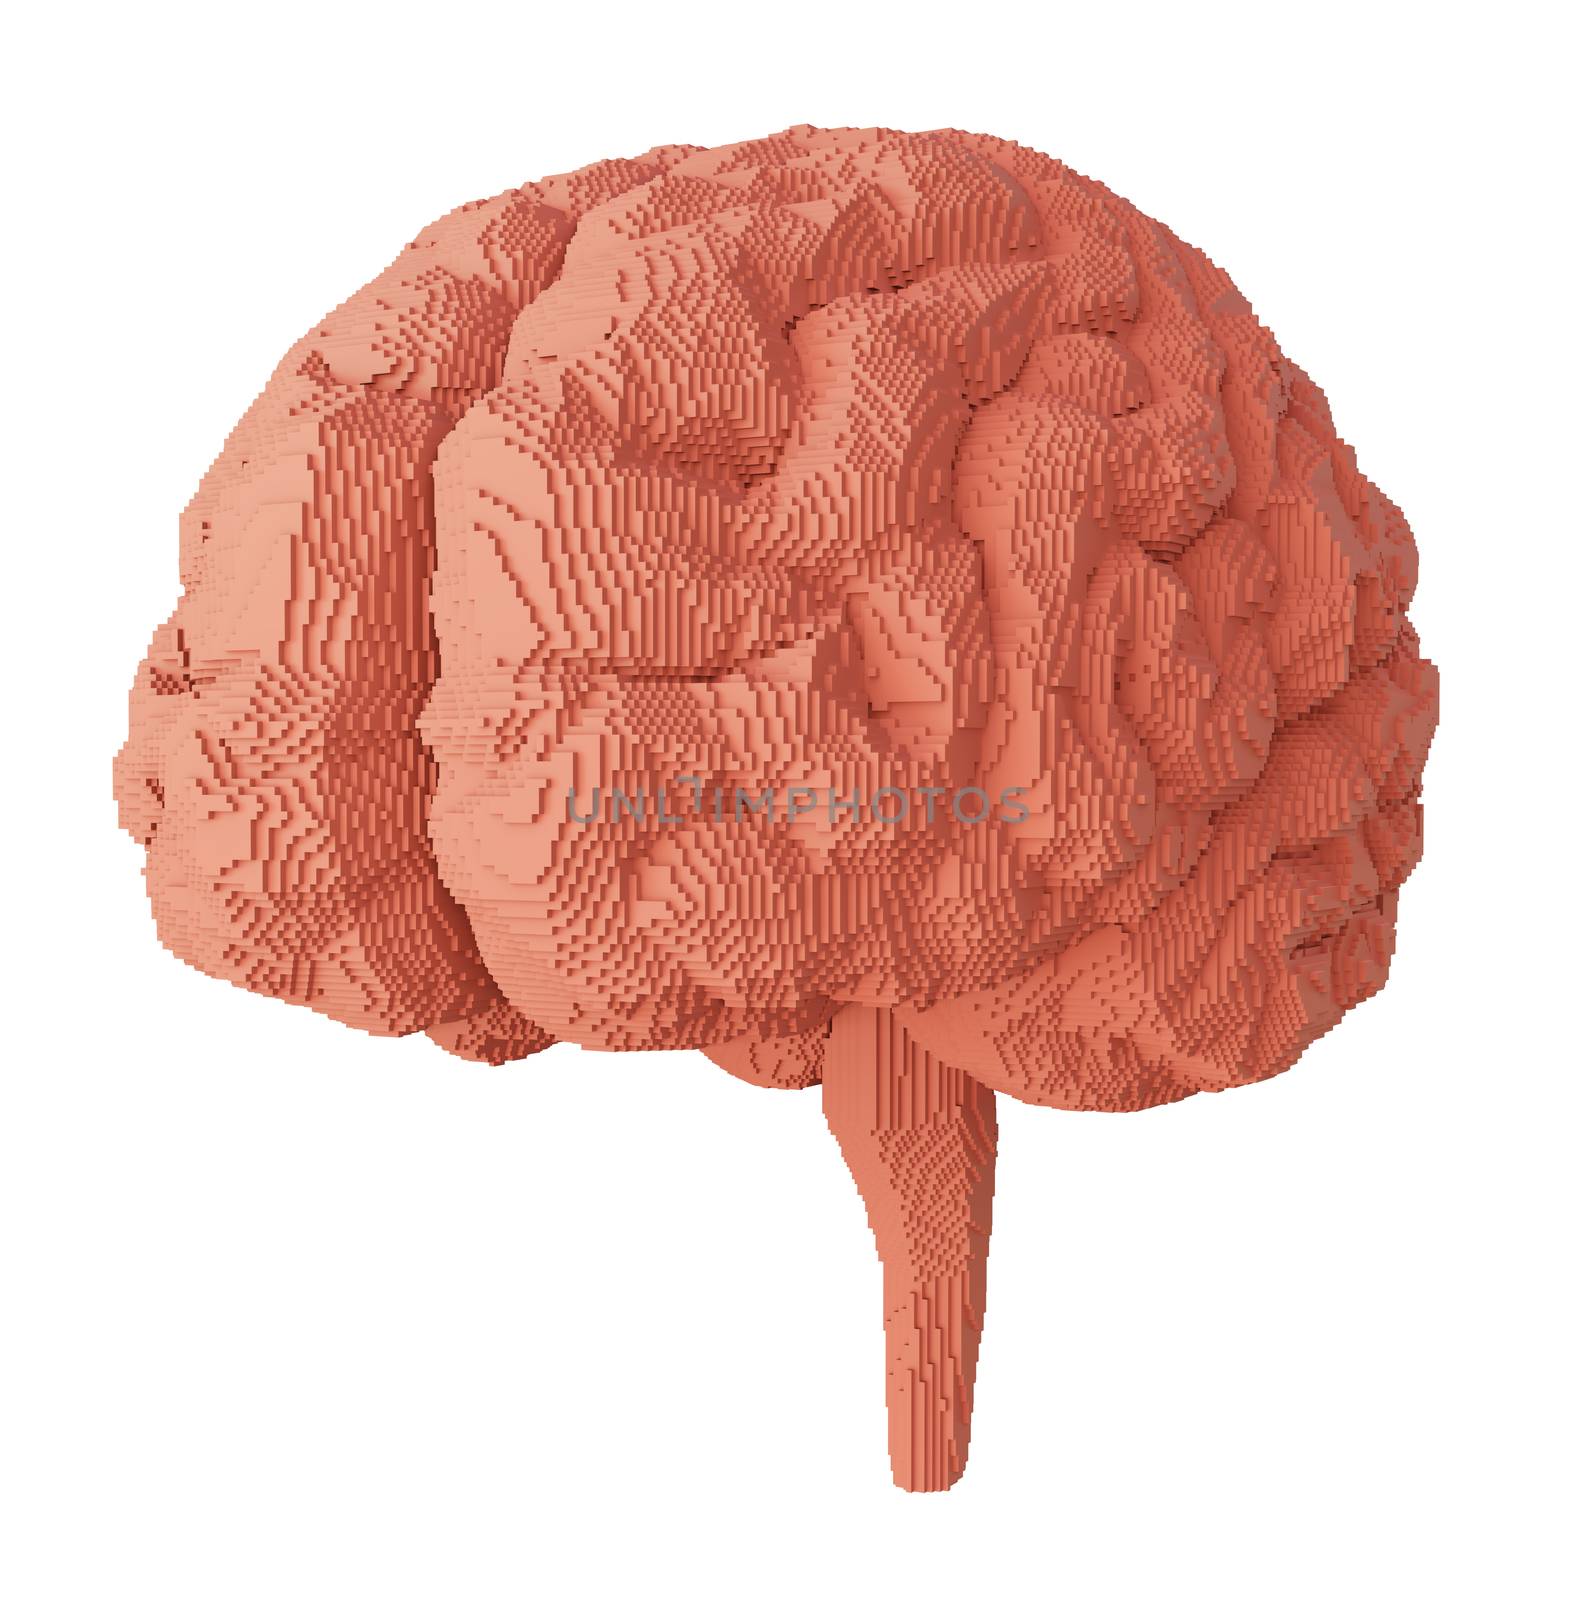 3d rendered brain isolated by cherezoff